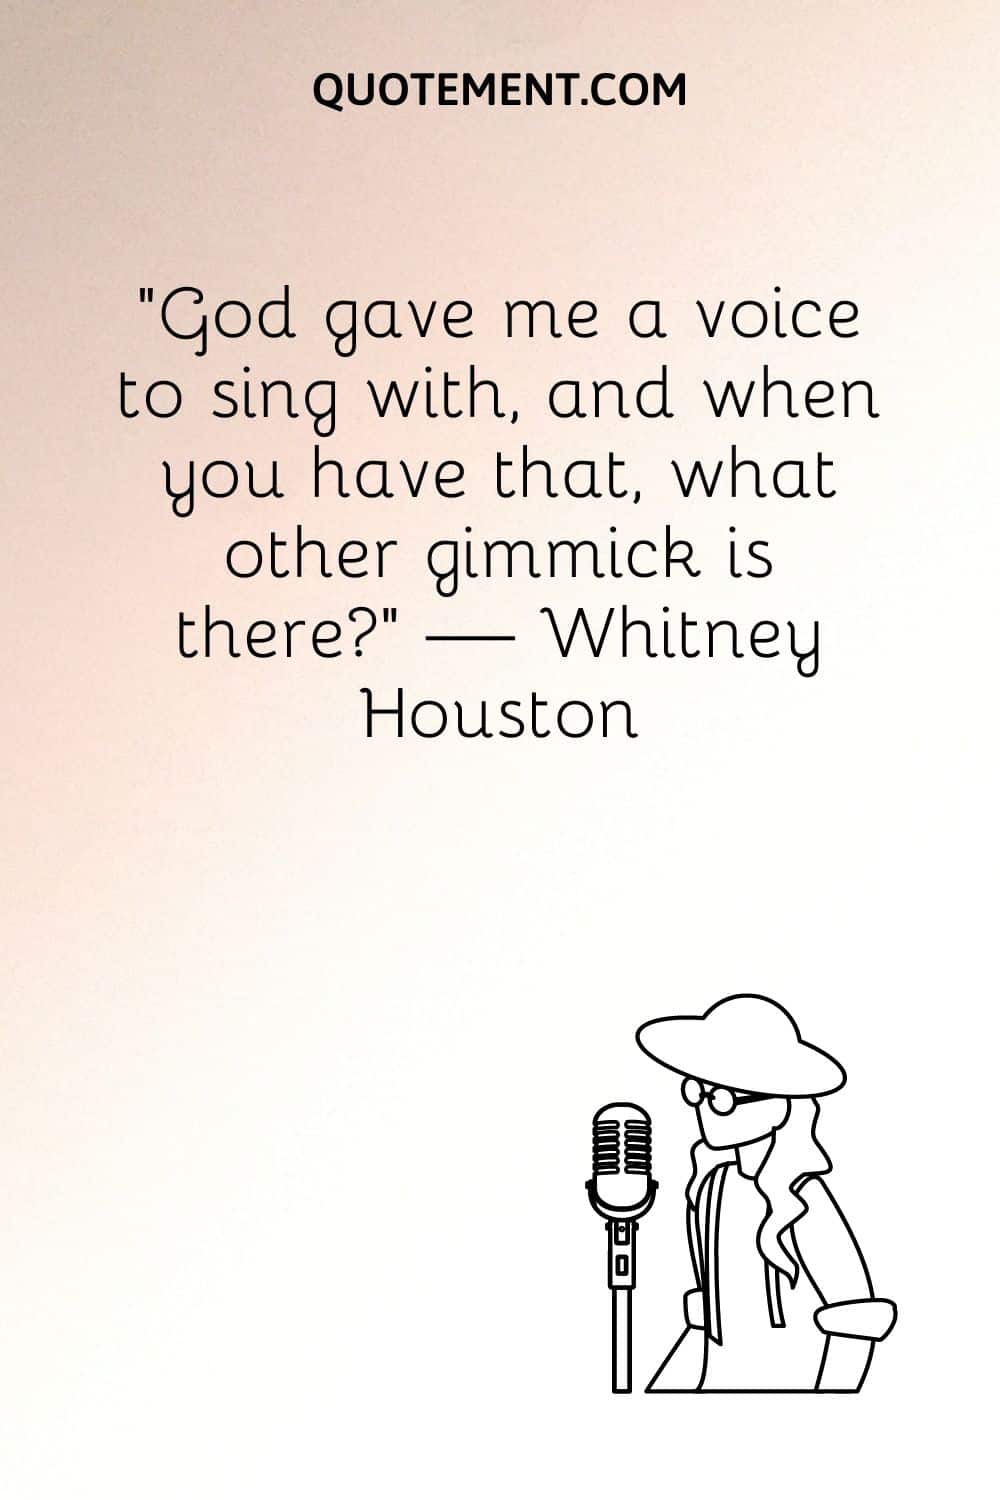 “God gave me a voice to sing with, and when you have that, what other gimmick is there” — Whitney Houston